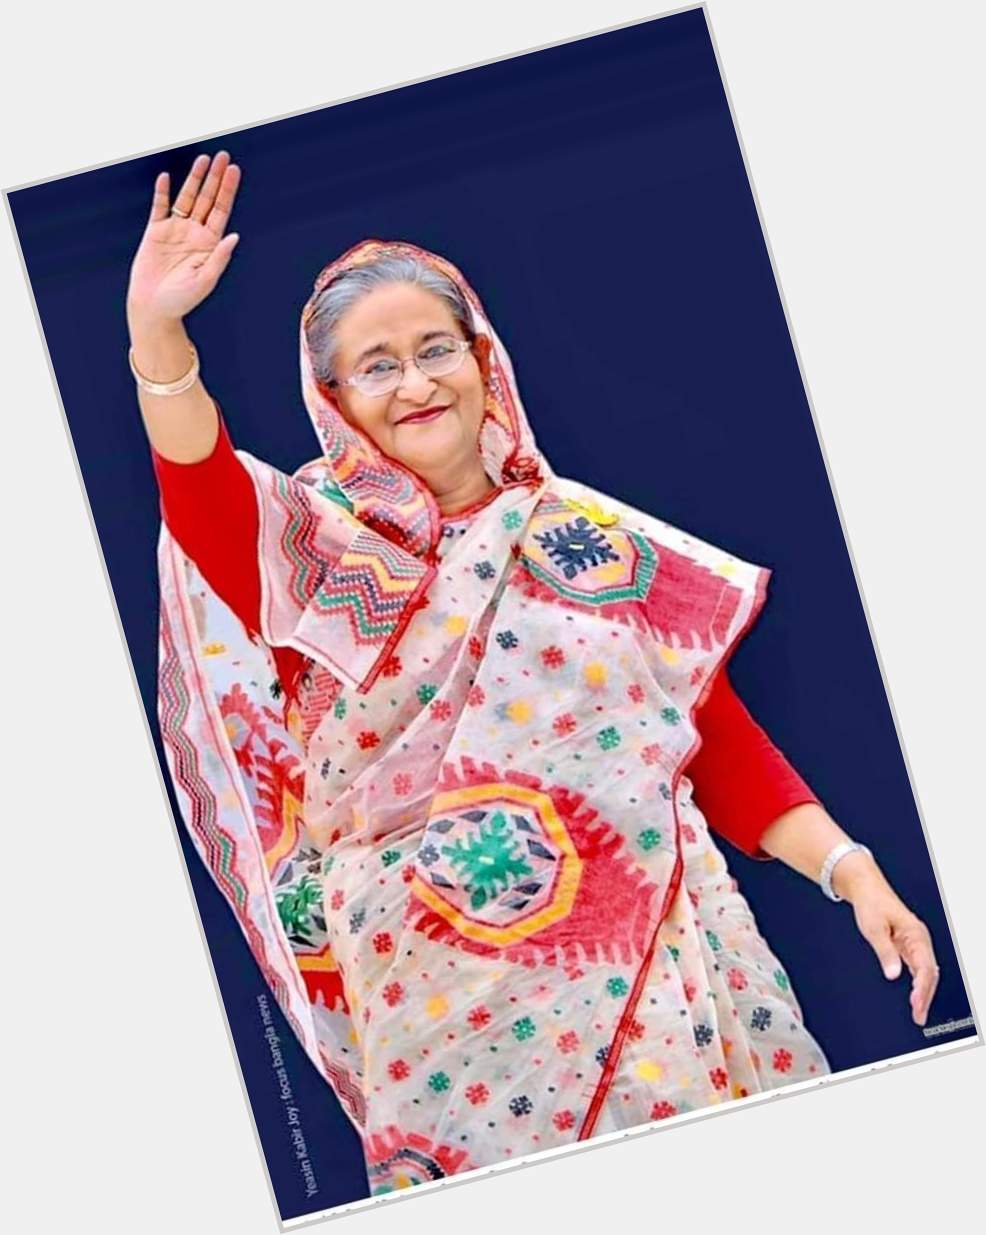 28 September 
Happy Birthday To Honorable Prime Minister SHEIKH HASINA. 